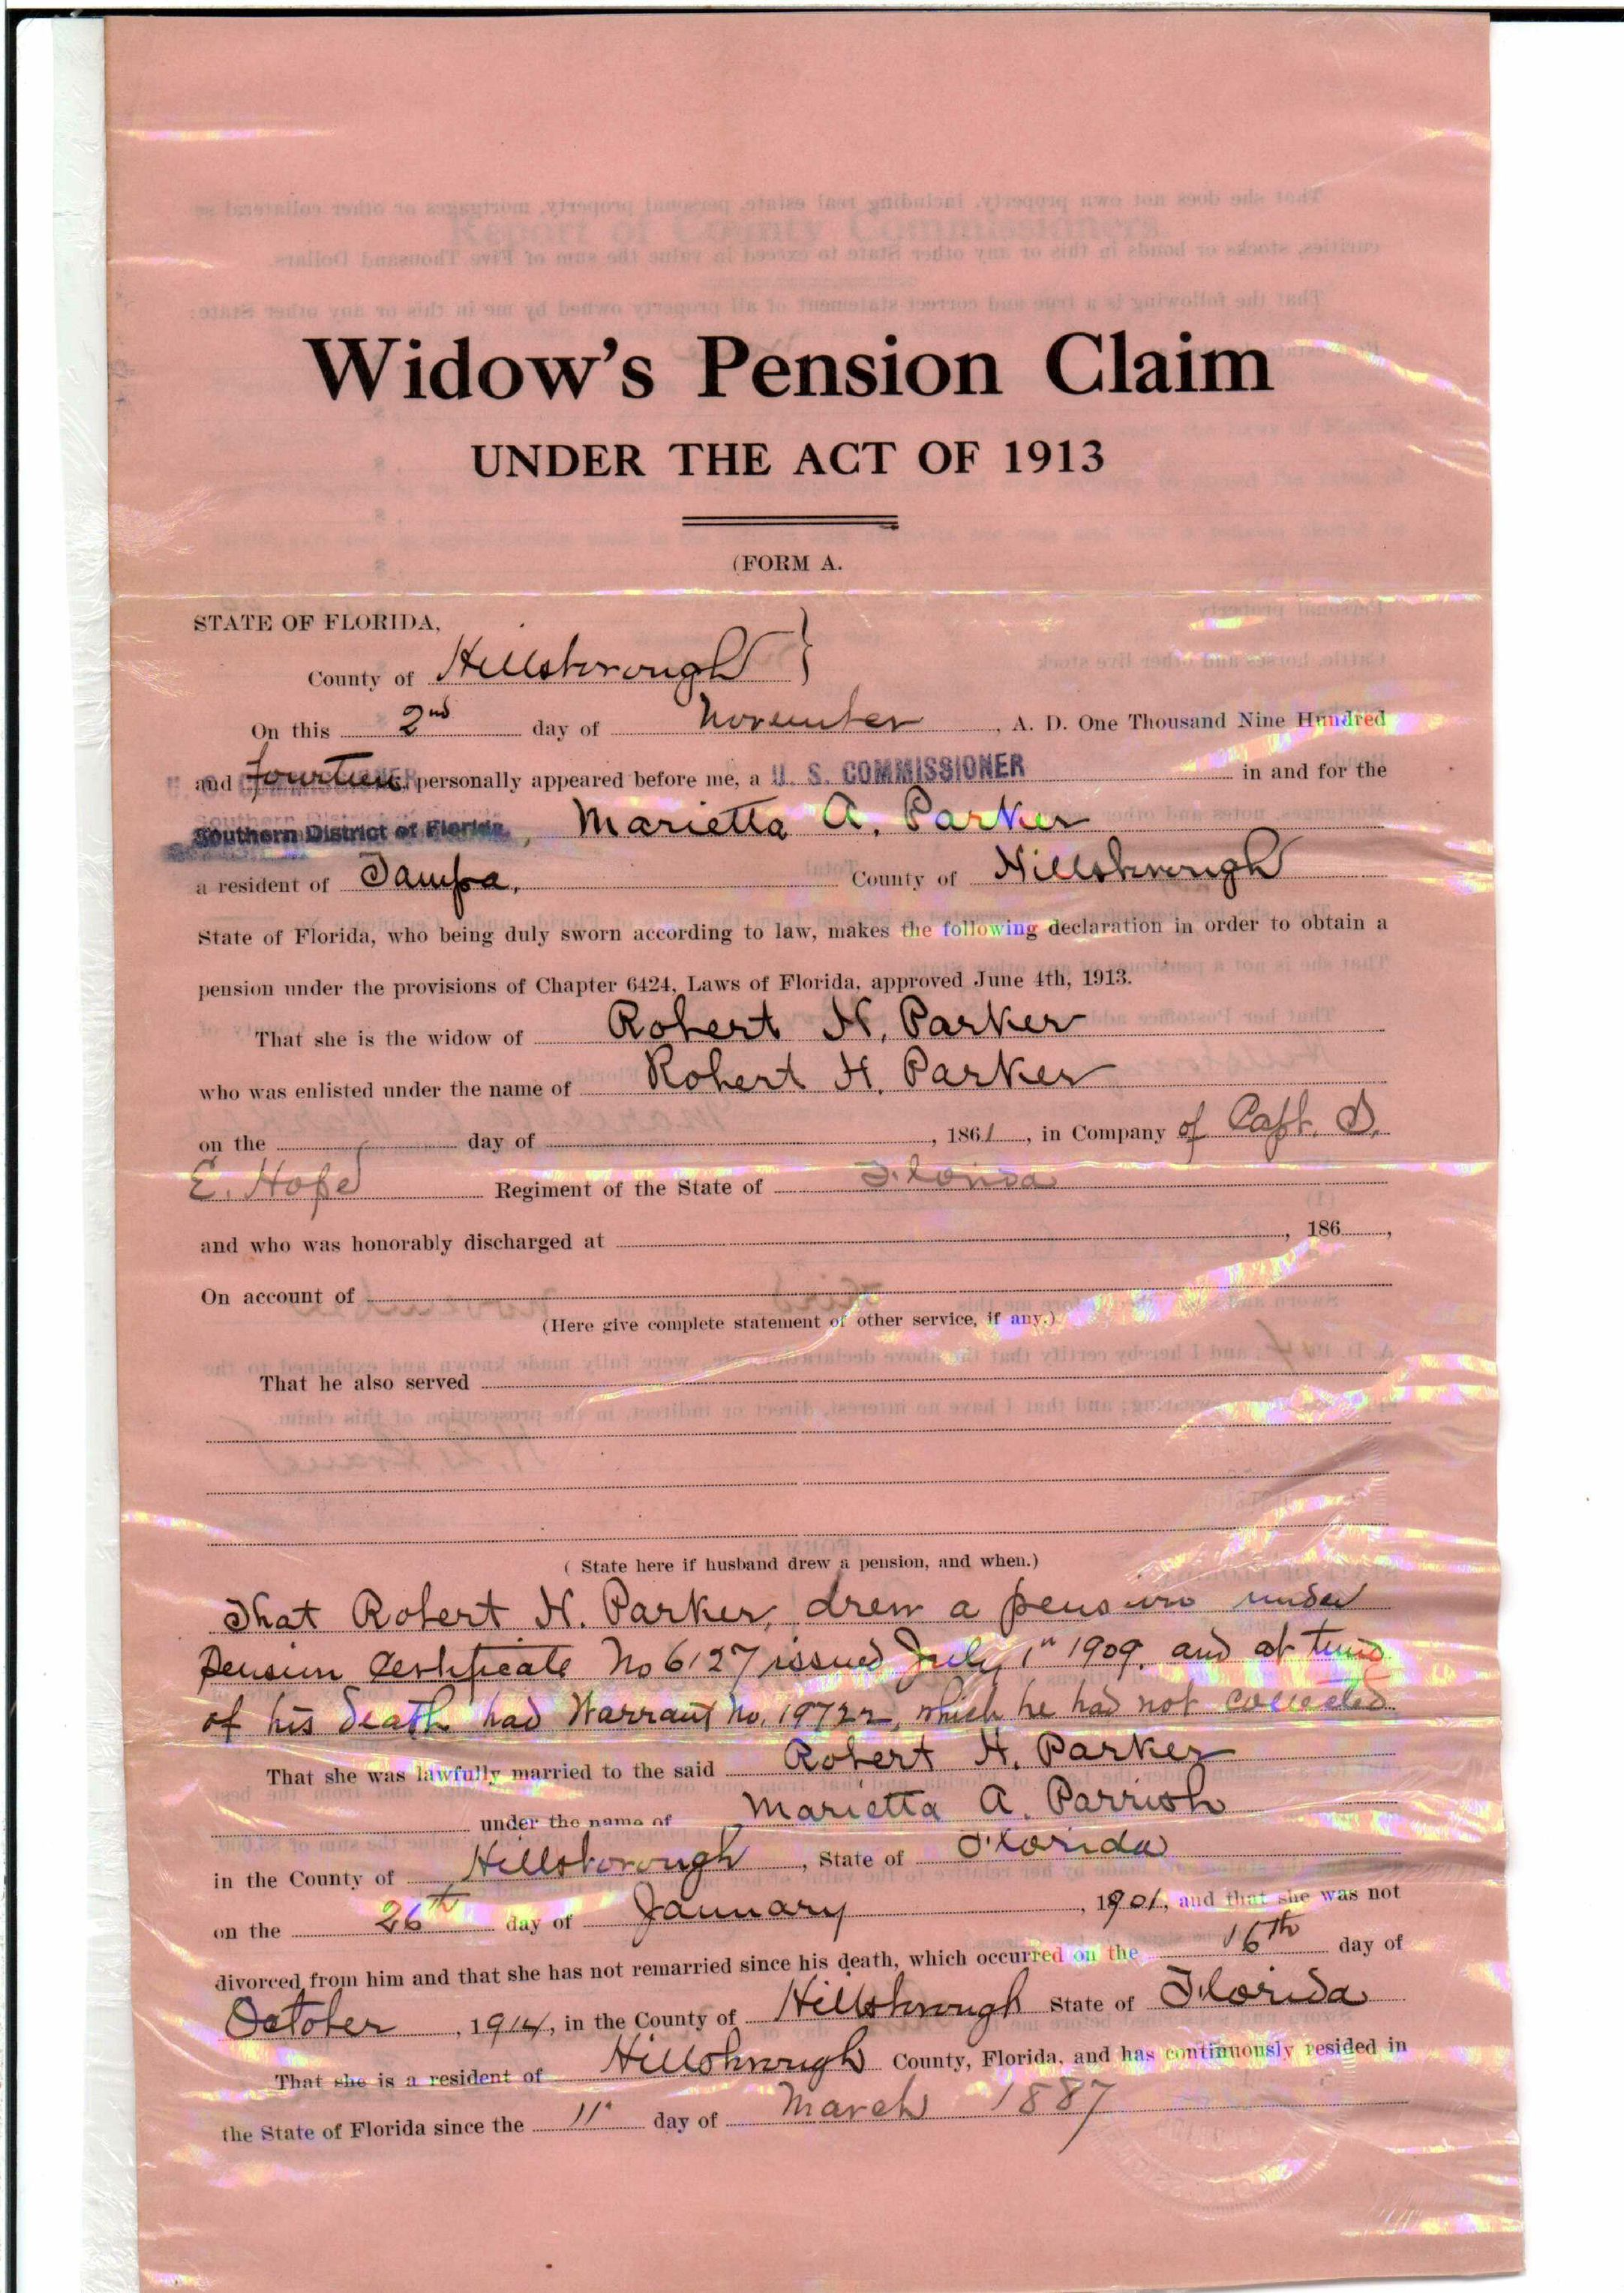 Page from the Confederate Pension Application file of Robert H. Parker of Hillsborough County. Paperwork from the pension claim of his widow Marietta is also included in the file.